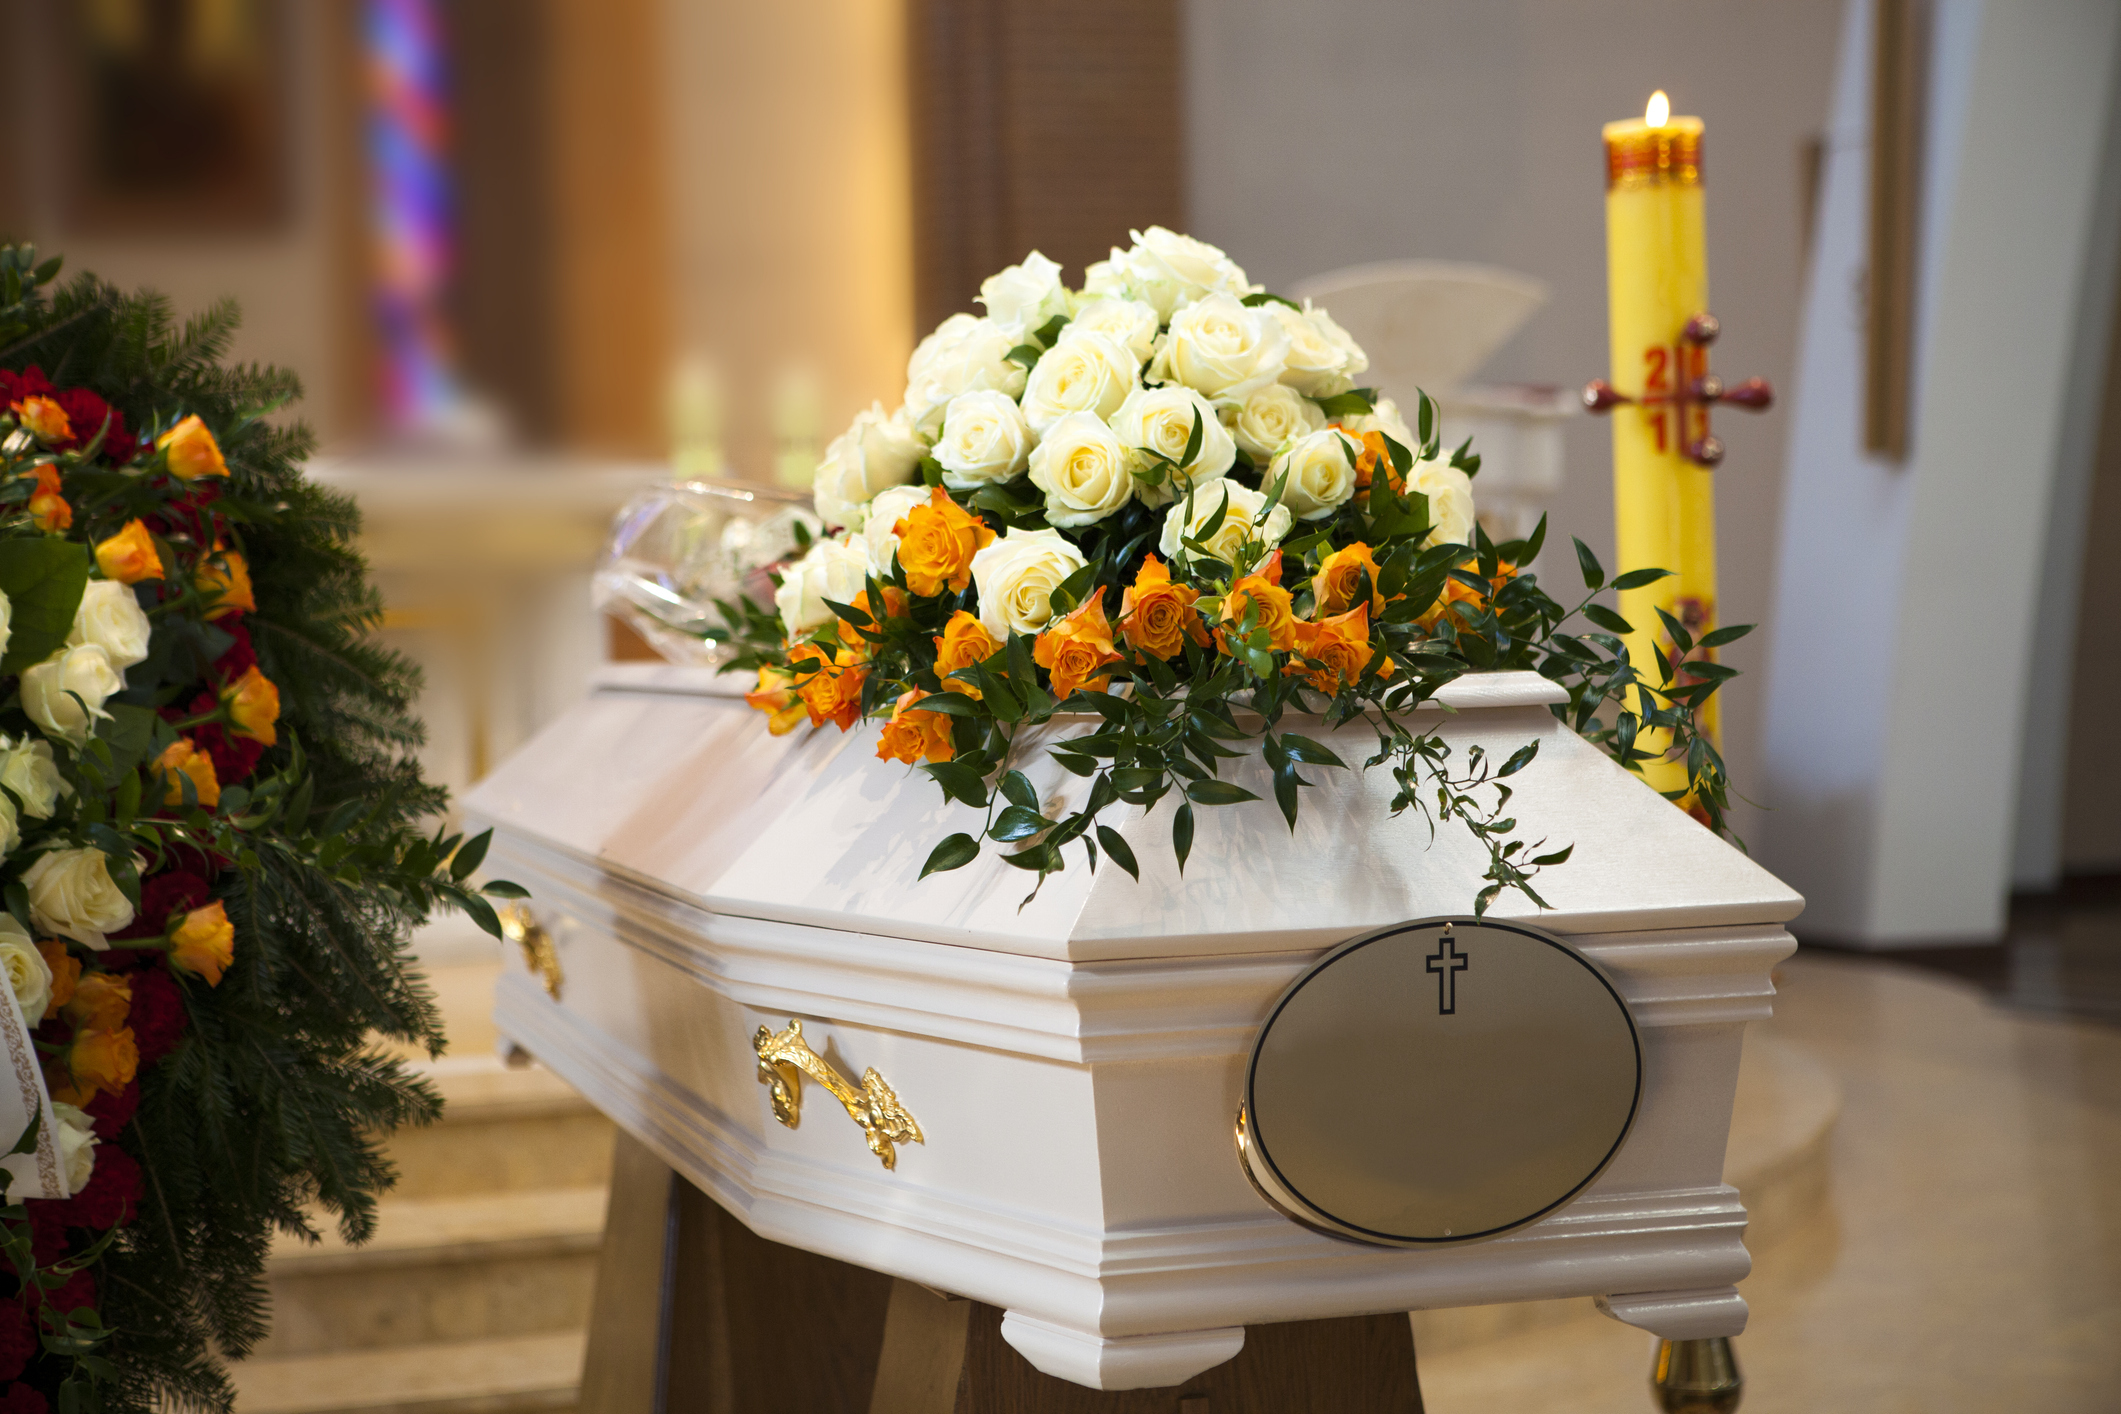 Burial with dictionaries, pets: Weird requests appall London’s funeral services